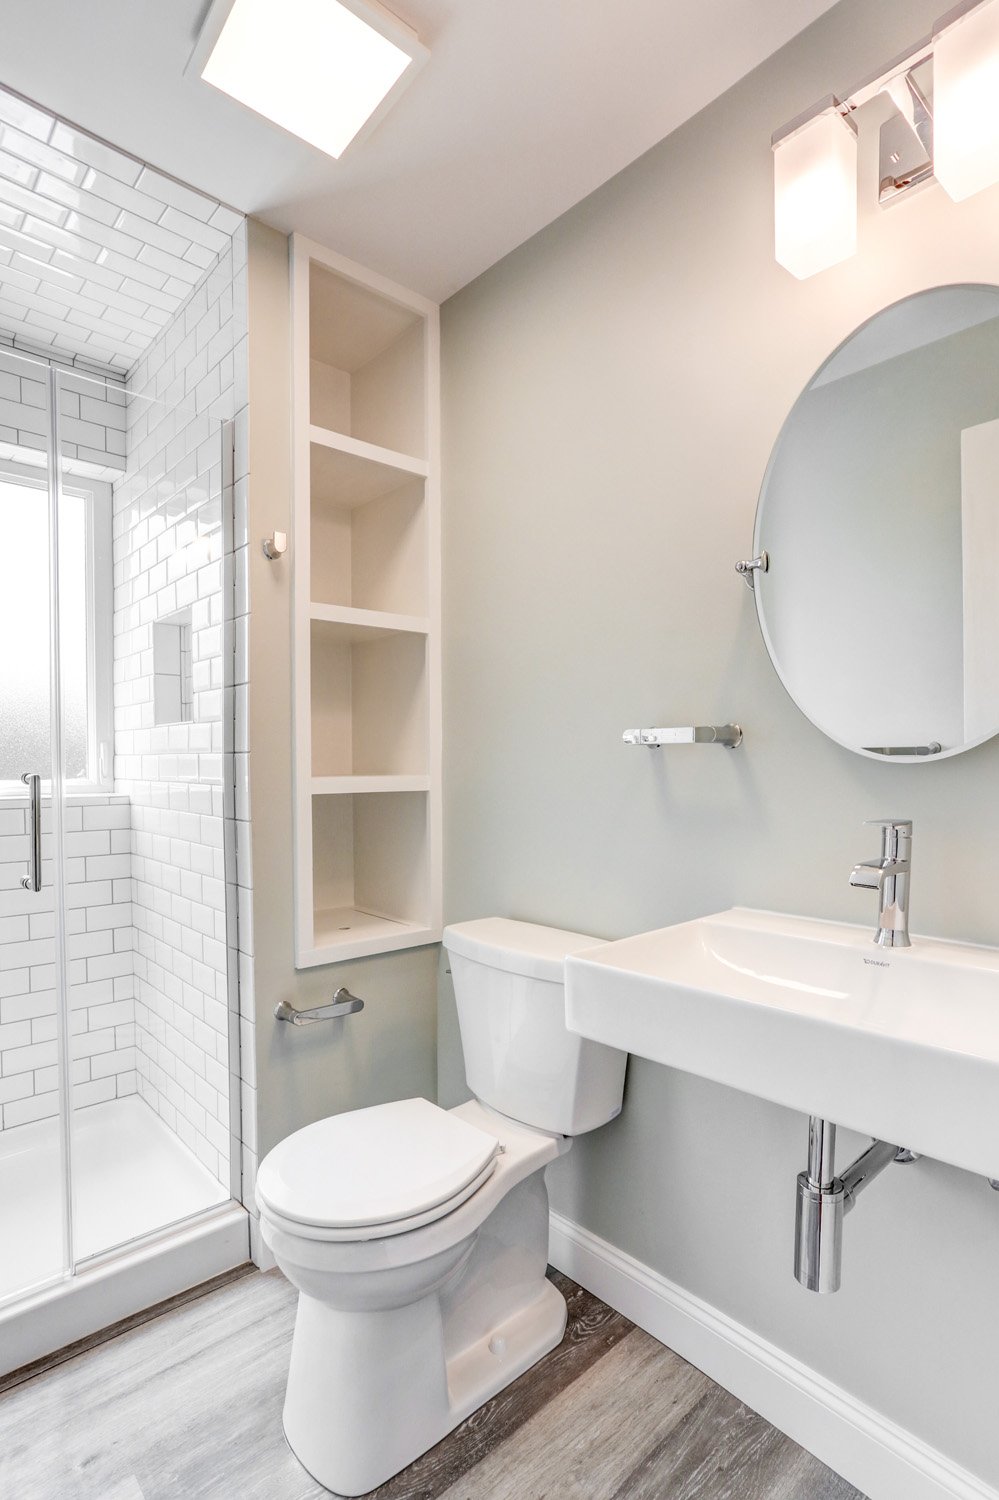 Lancaster City Bathroom Remodel with build in shelves